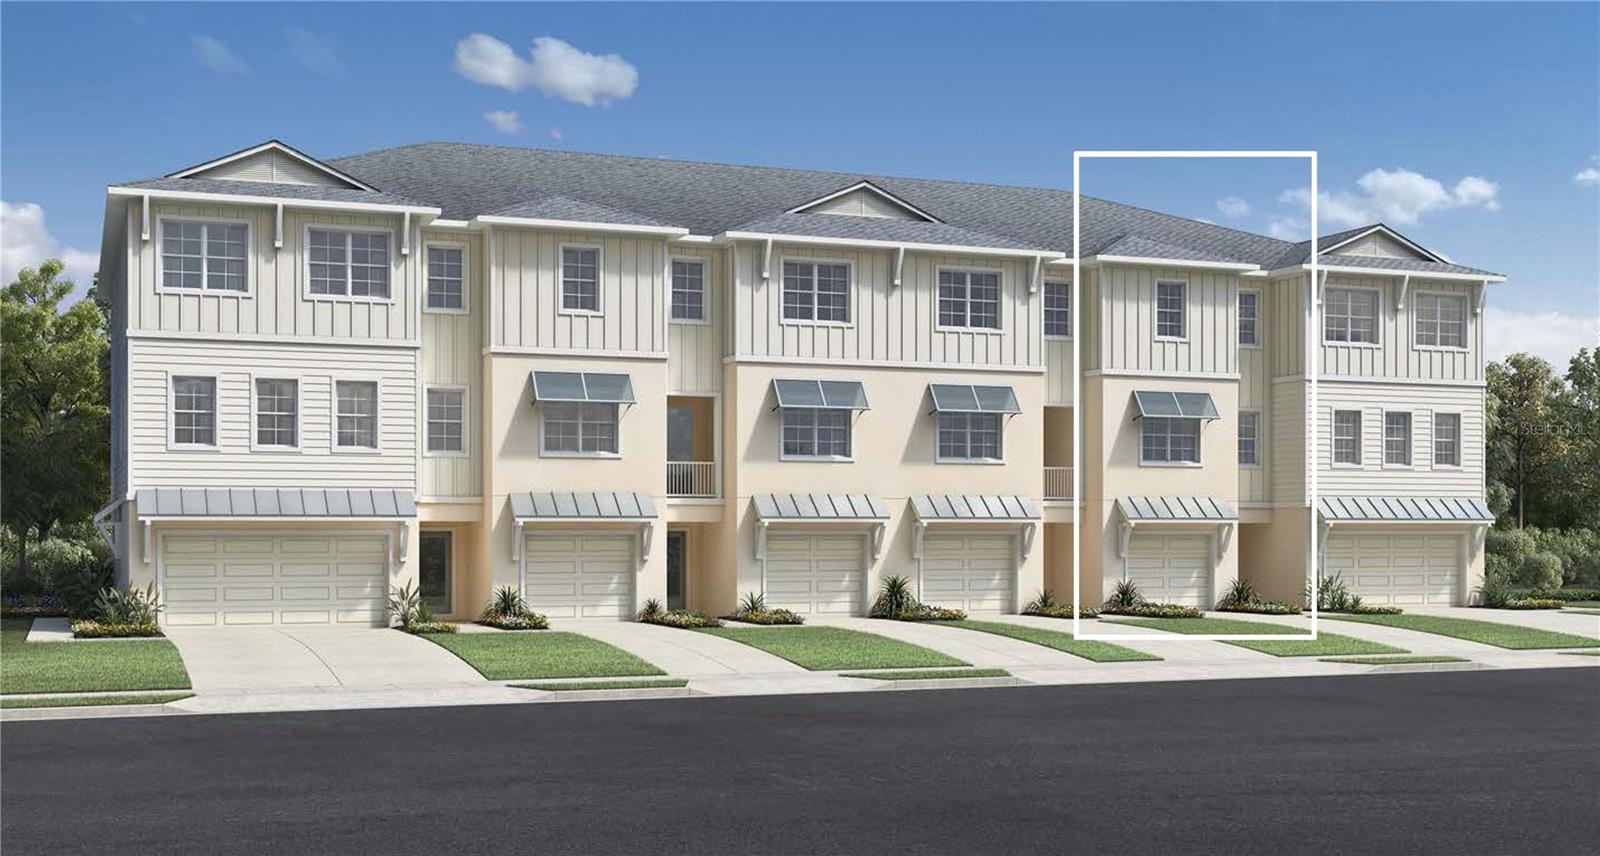 Rendering of Aloma front elevation